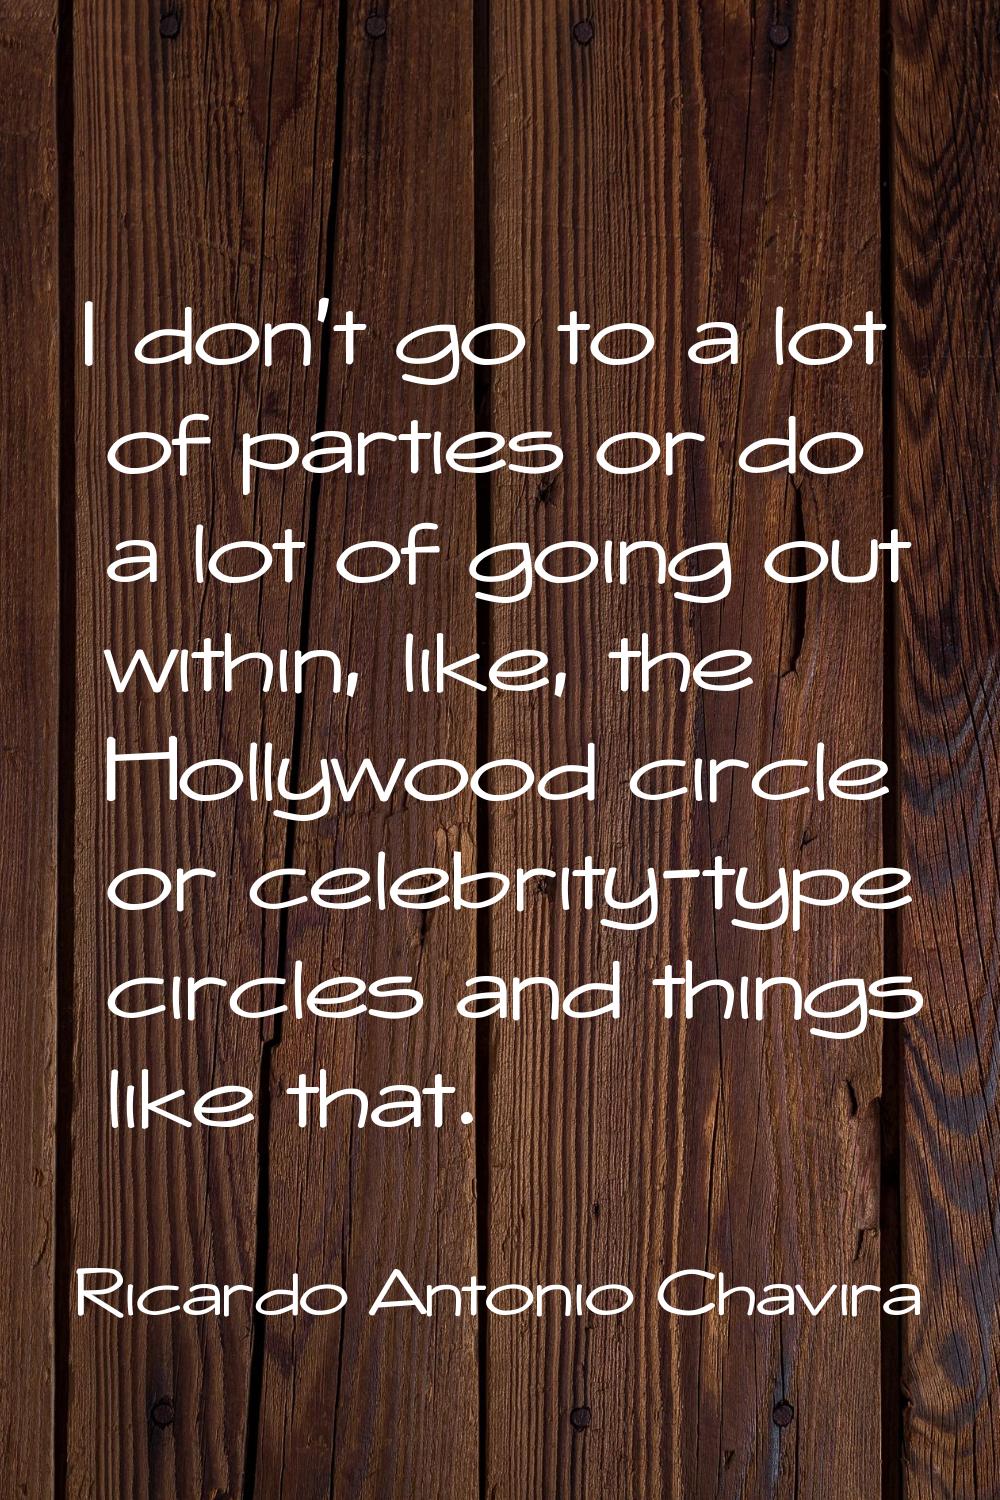 I don't go to a lot of parties or do a lot of going out within, like, the Hollywood circle or celeb